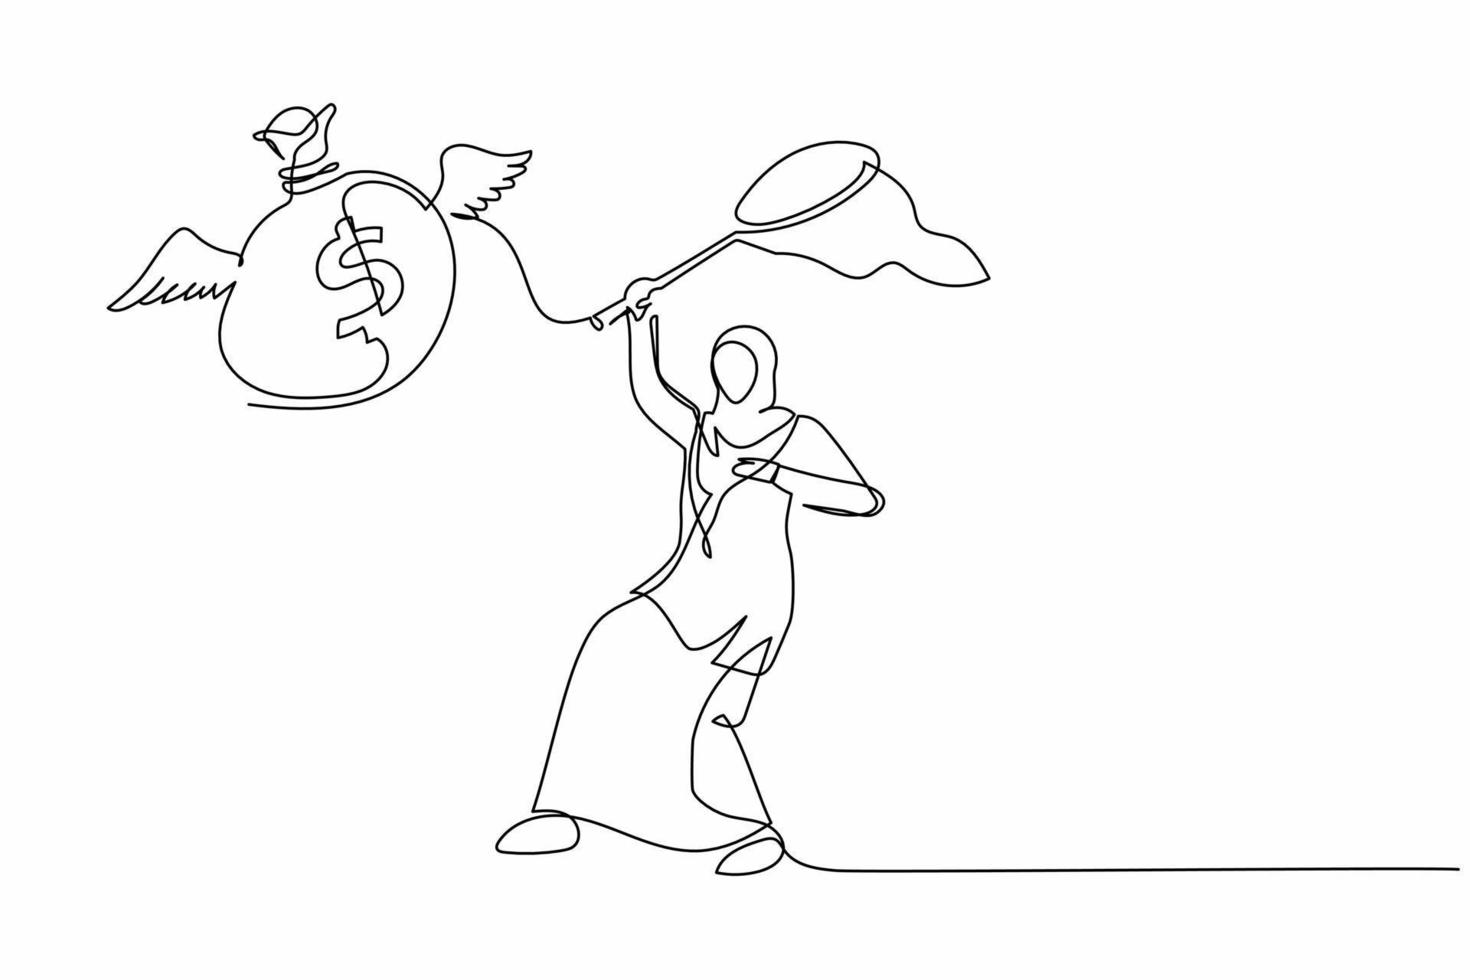 Continuous one line drawing Arab businesswoman try to catching flying money bag with butterfly net. Losing jackpot of business project. Unlucky employee. Single line design vector graphic illustration